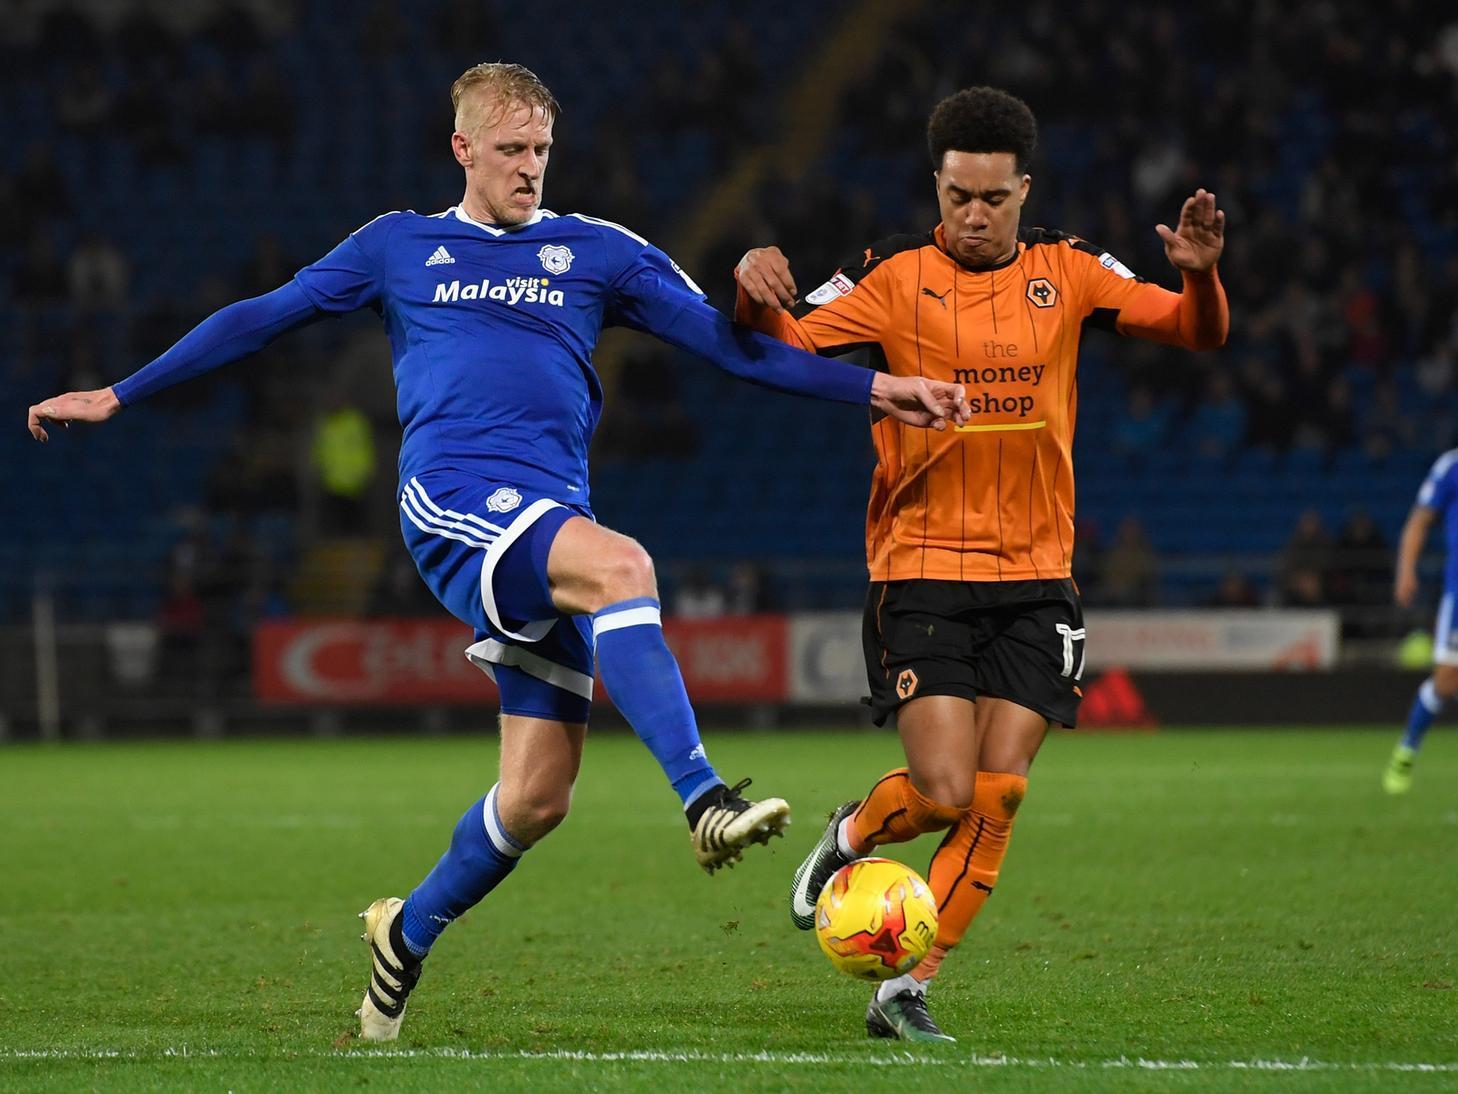 Ex-Cardiff City player Lex Immers has revealed he was so homesick during his time at the club that he told his agent he'd give up his lucrative deal and become a painter, if it secured his exit. (Sport Witness)